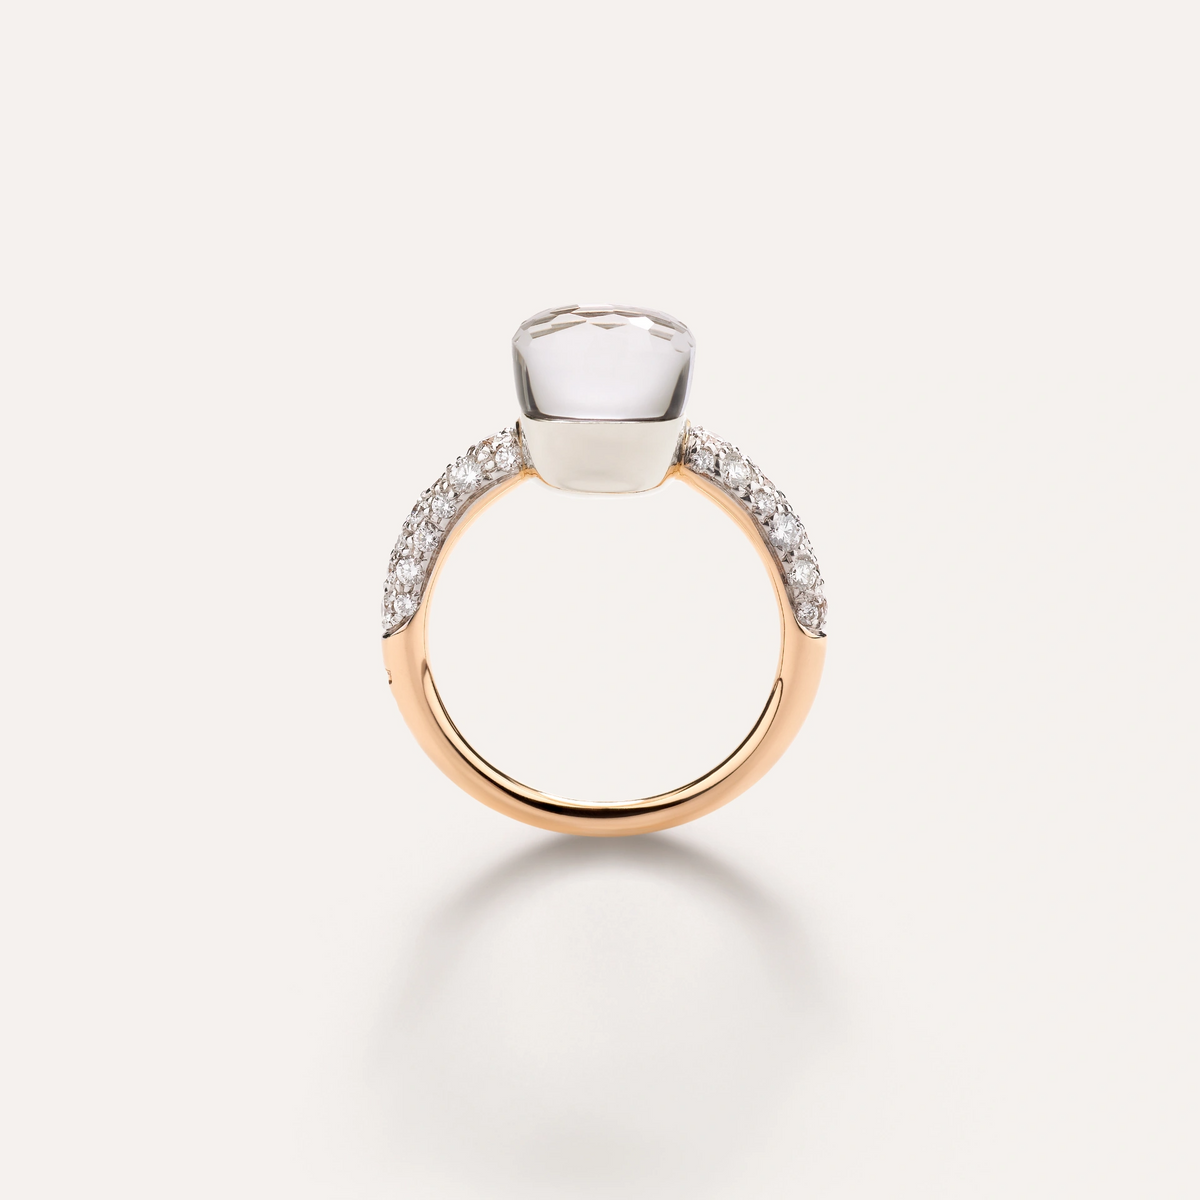 Petit Ring from Pomellato Nudo Collection Featuring white topaz and diamonds set in 18k White and Rose Gold